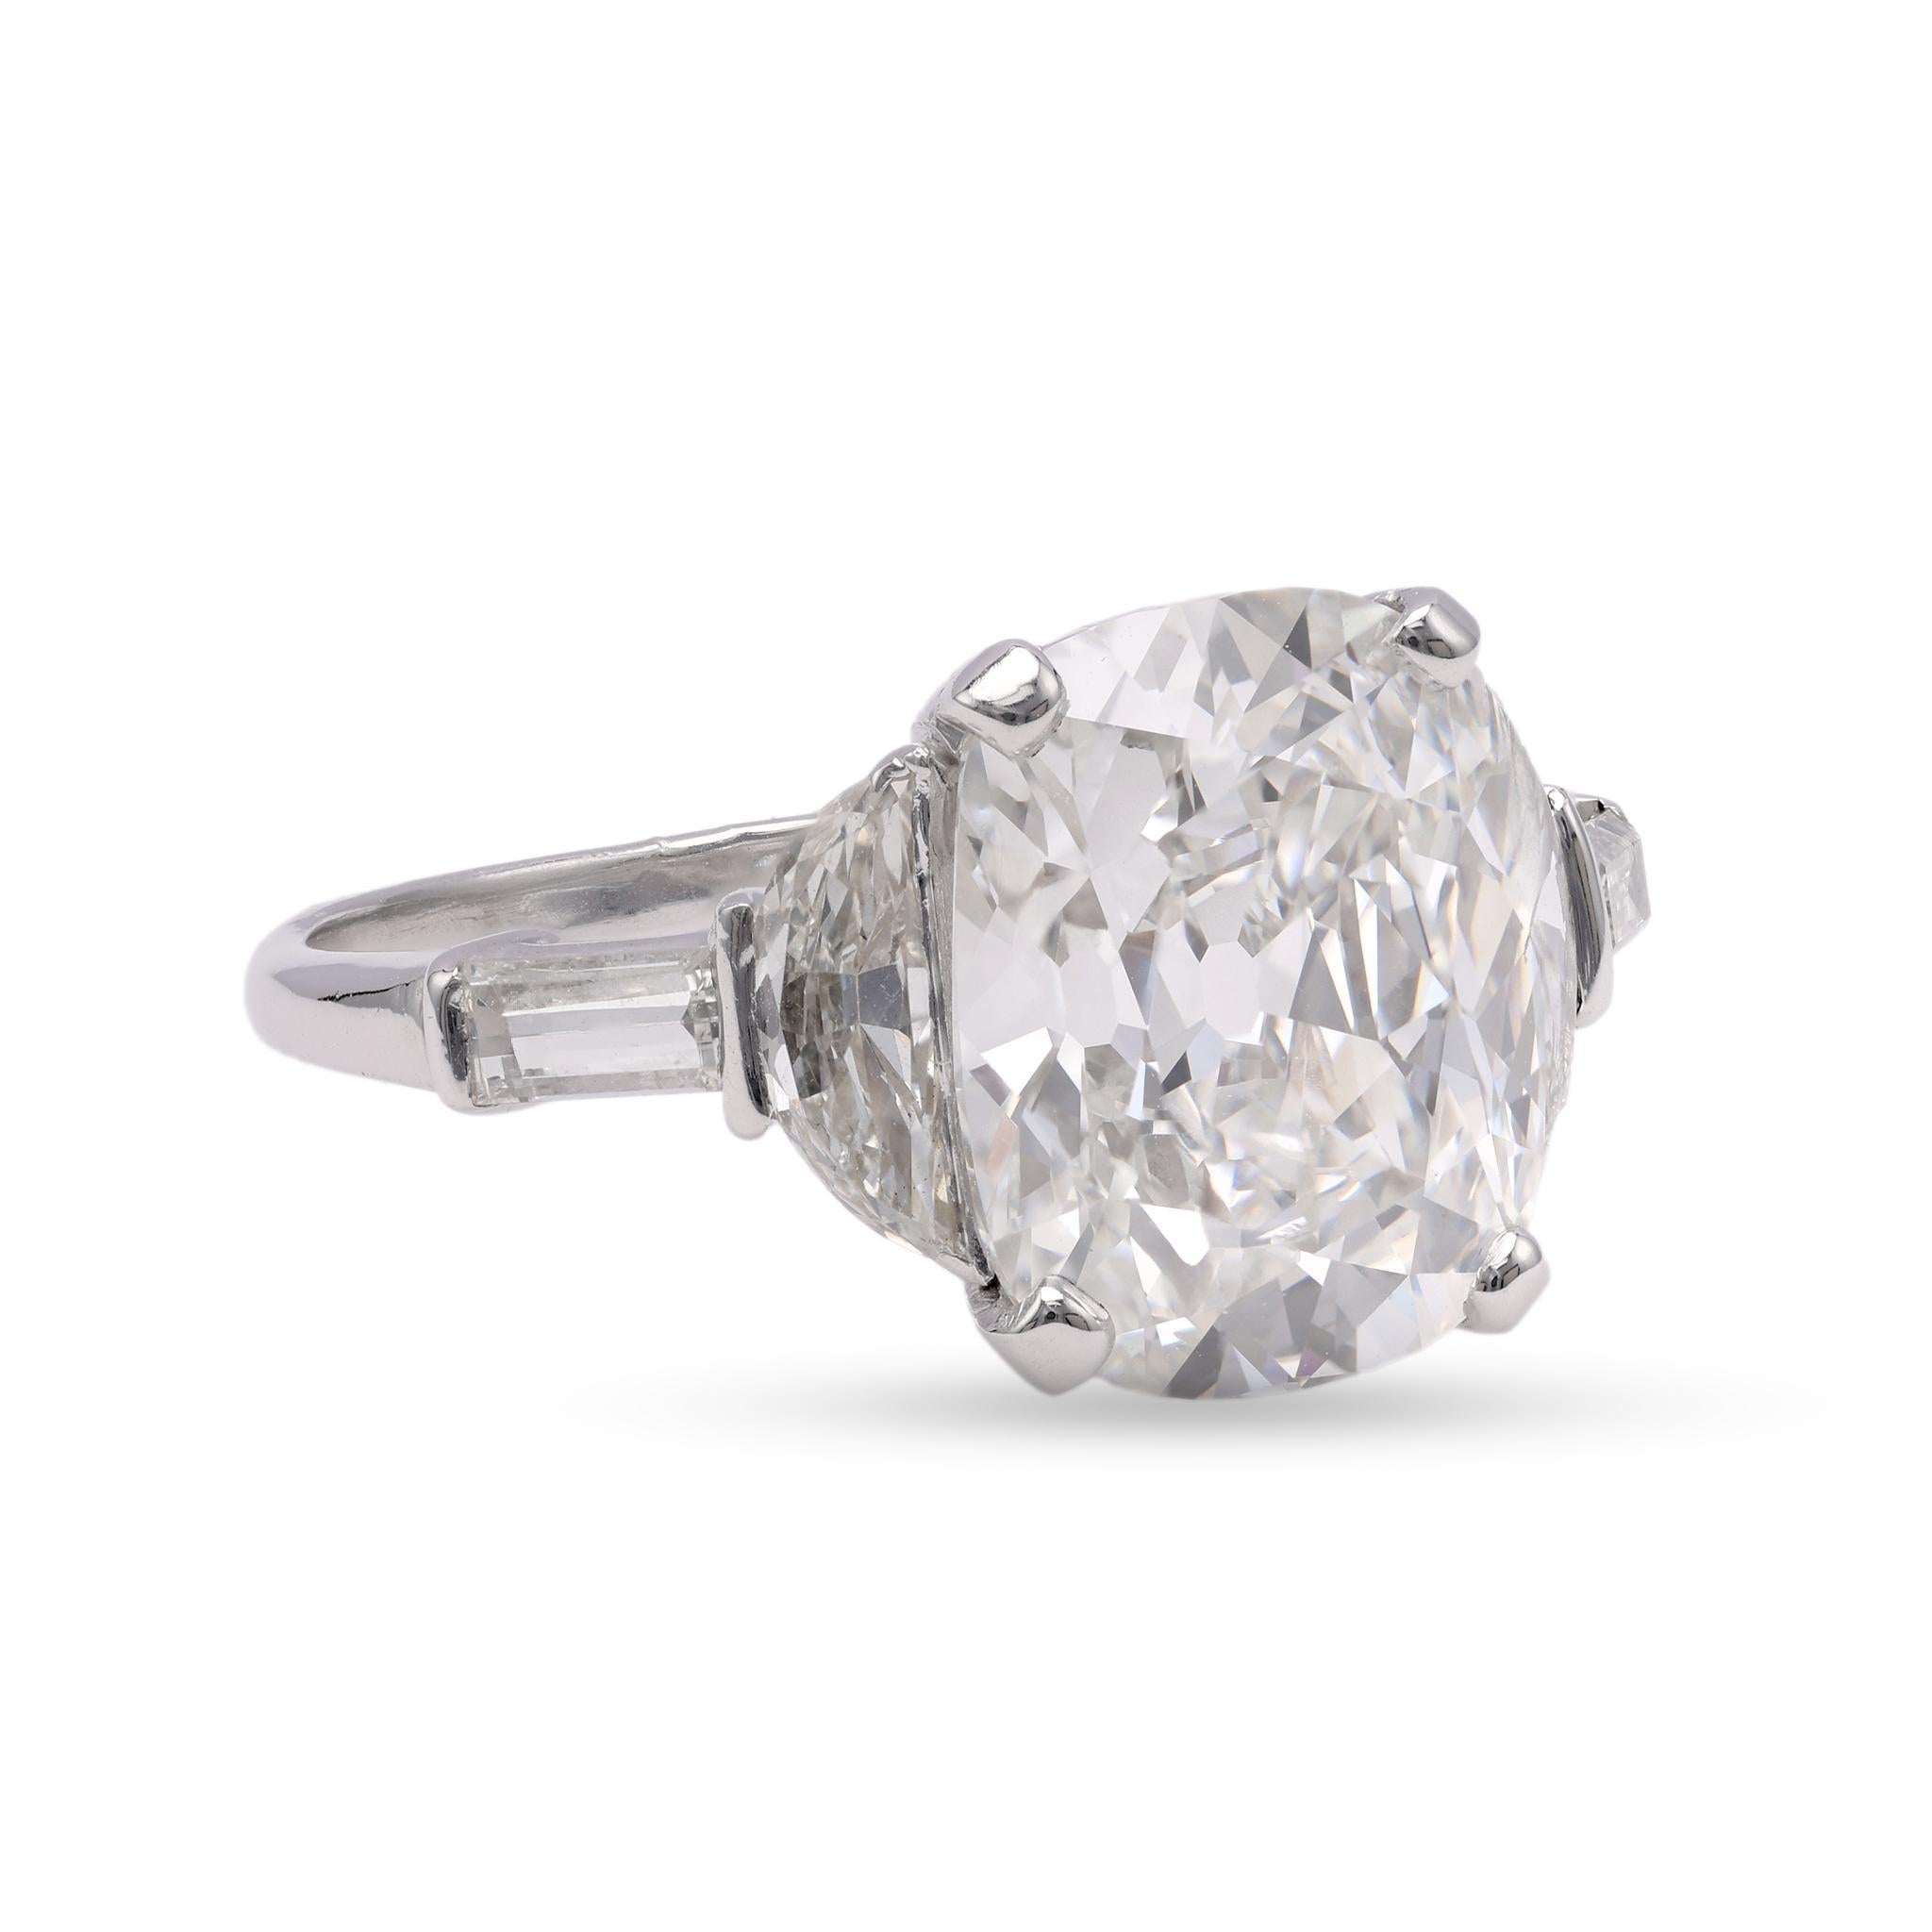 One Vintage GIA 4.52 Carat Antique Cushion Cut Diamond Platinum Ring. Featuring one GIA cushion modified brilliant cut diamond of 4.52 carats, accompanied by GIA #2239209305 stating the diamond is F color, VS2 clarity. Accented by two half moon and